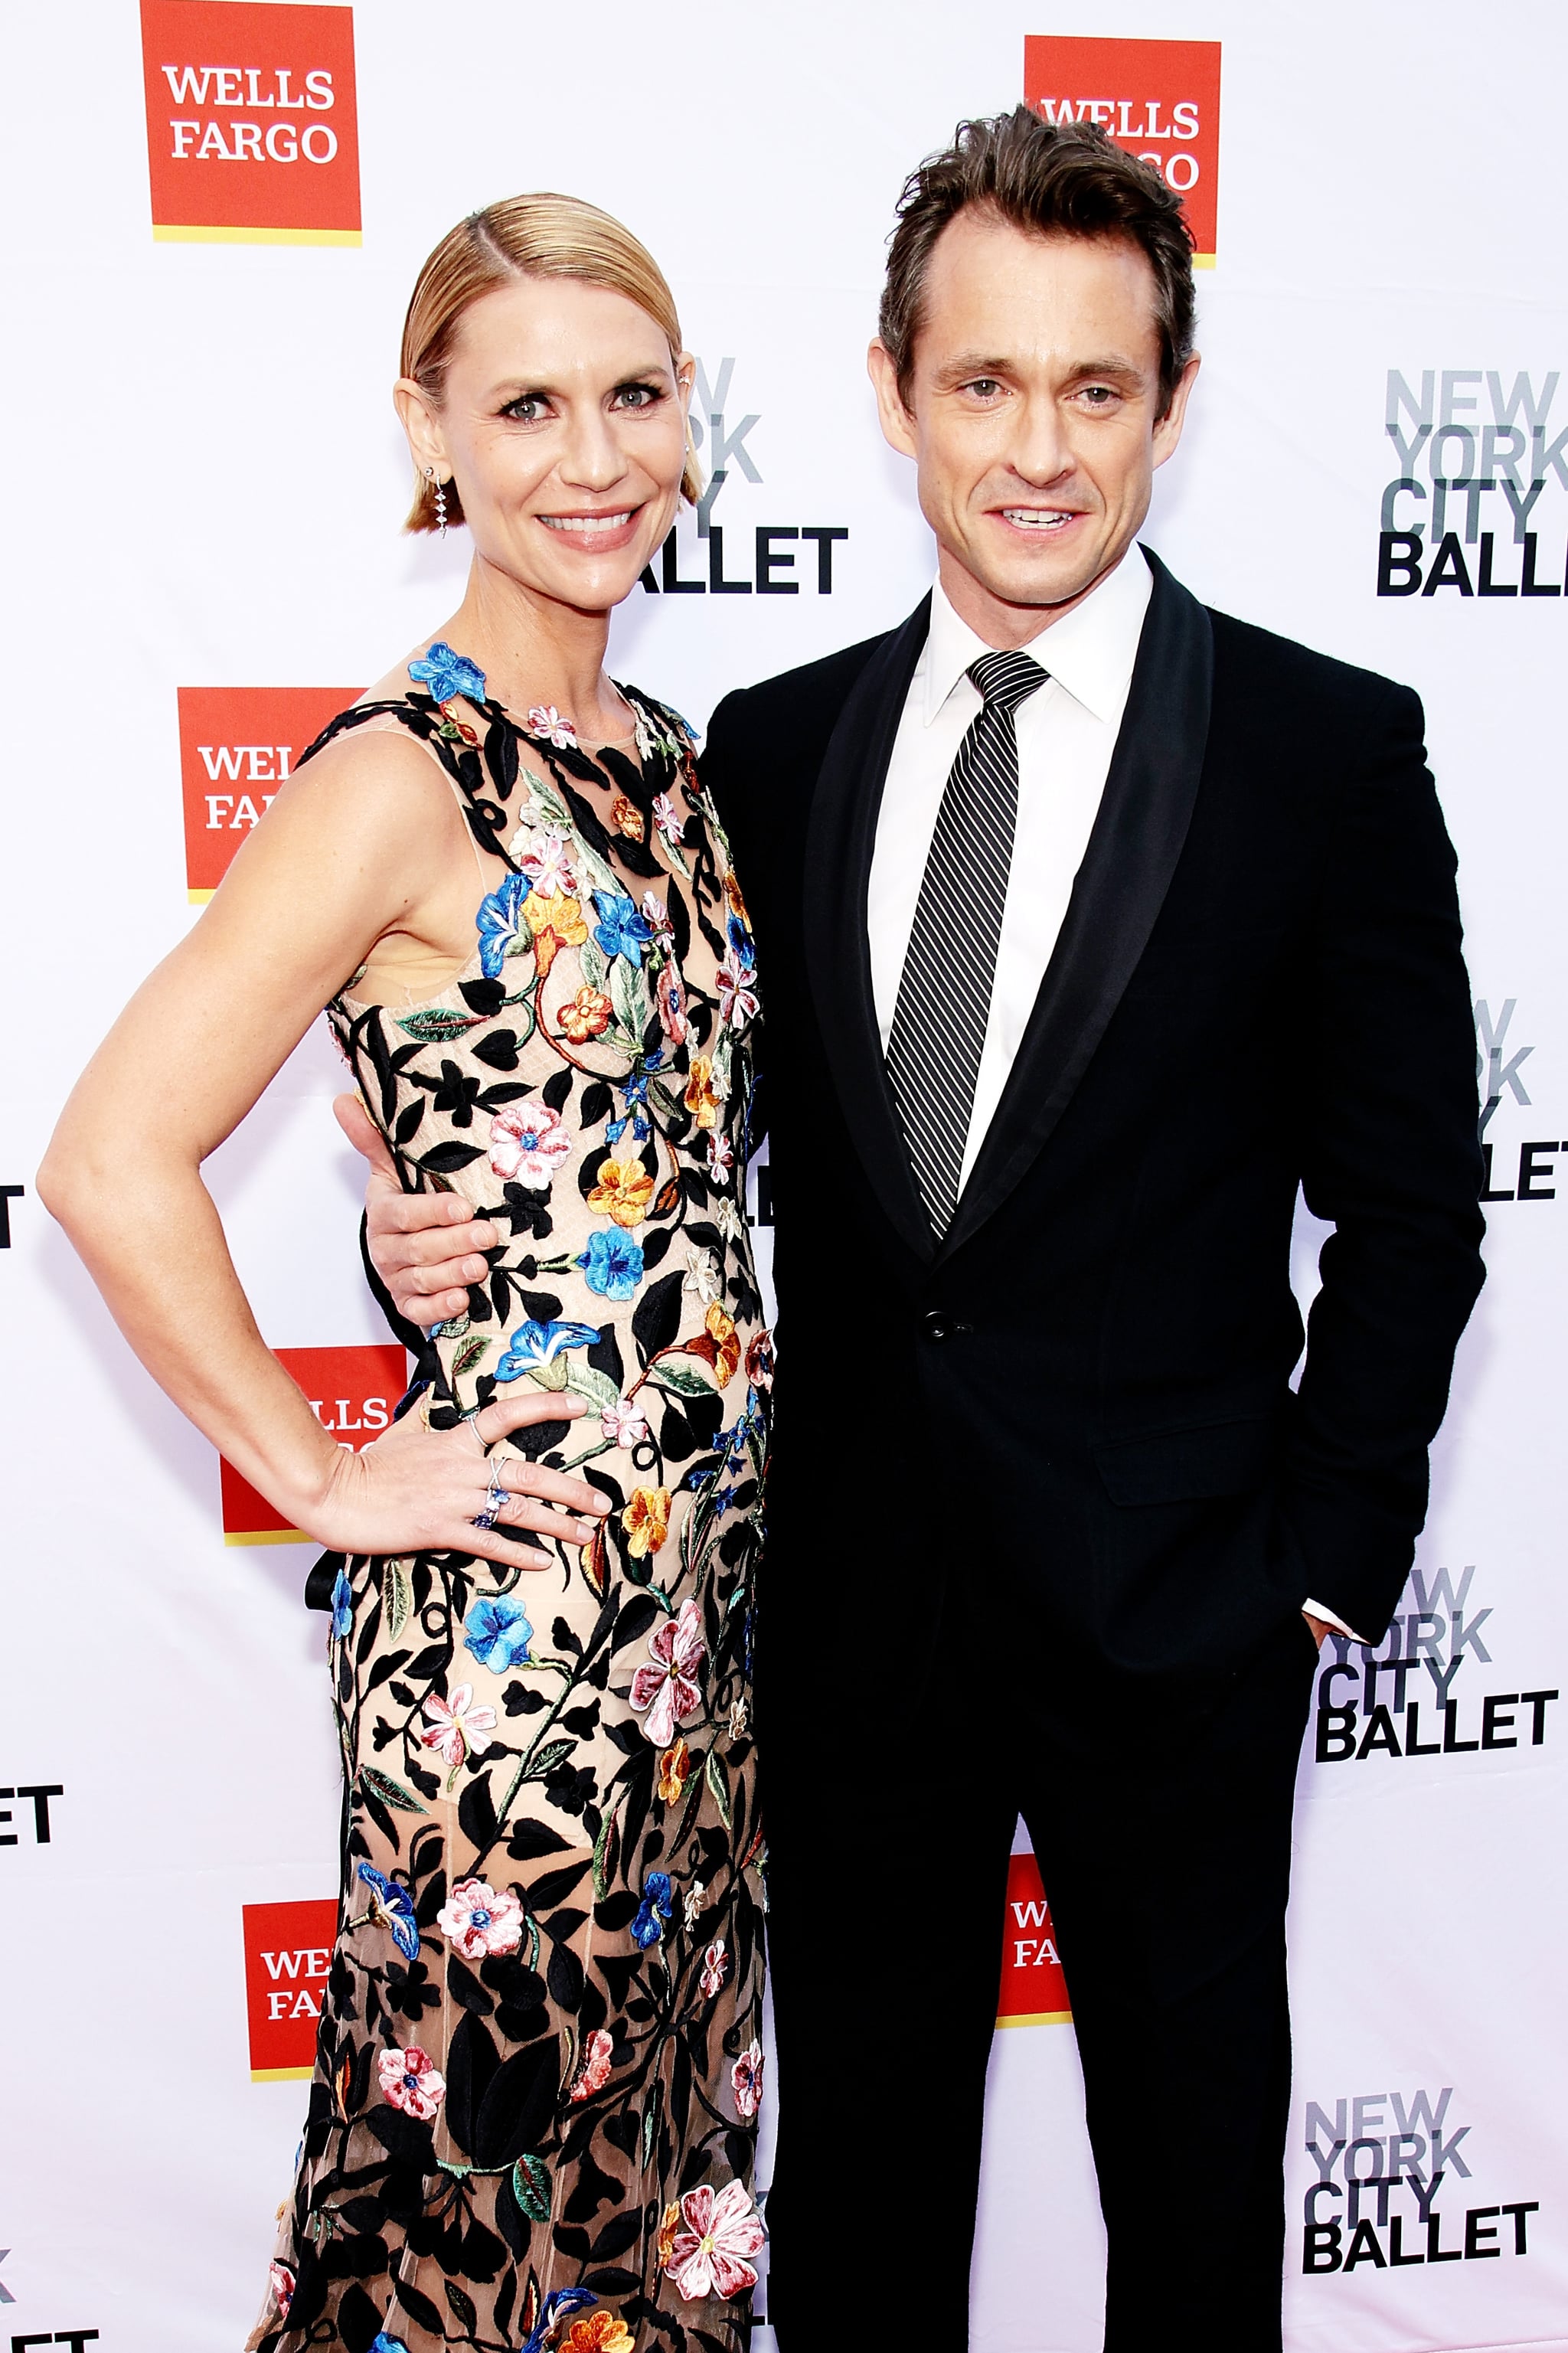 NEW YORK, NEW YORK - SEPTEMBER 28: Claire Danes (L) and Hugh Dancy attend the New York Ballet 2022 Fall Fashion Gala at David H. Koch Theatre at Lincoln Centre on September 28, 2022 in New York City. (Photo by Dimitrios Kambouris/Getty Images)